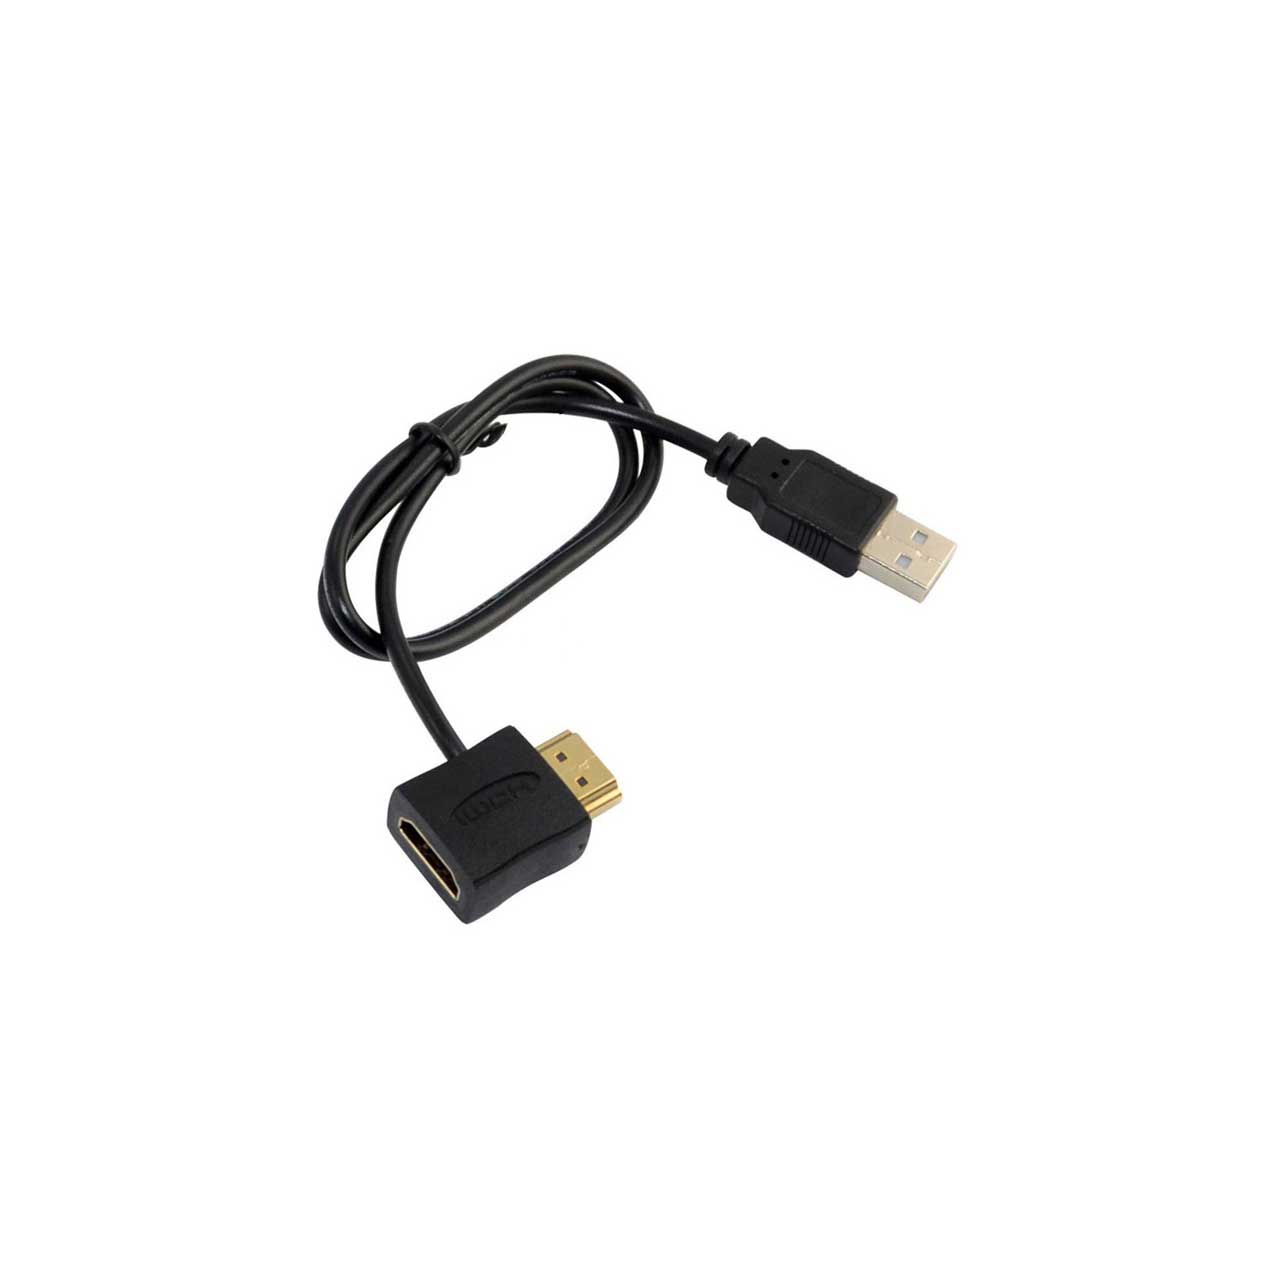 Hall Technologies GC-HDPI-USB USB to Injector for Javelin Cables